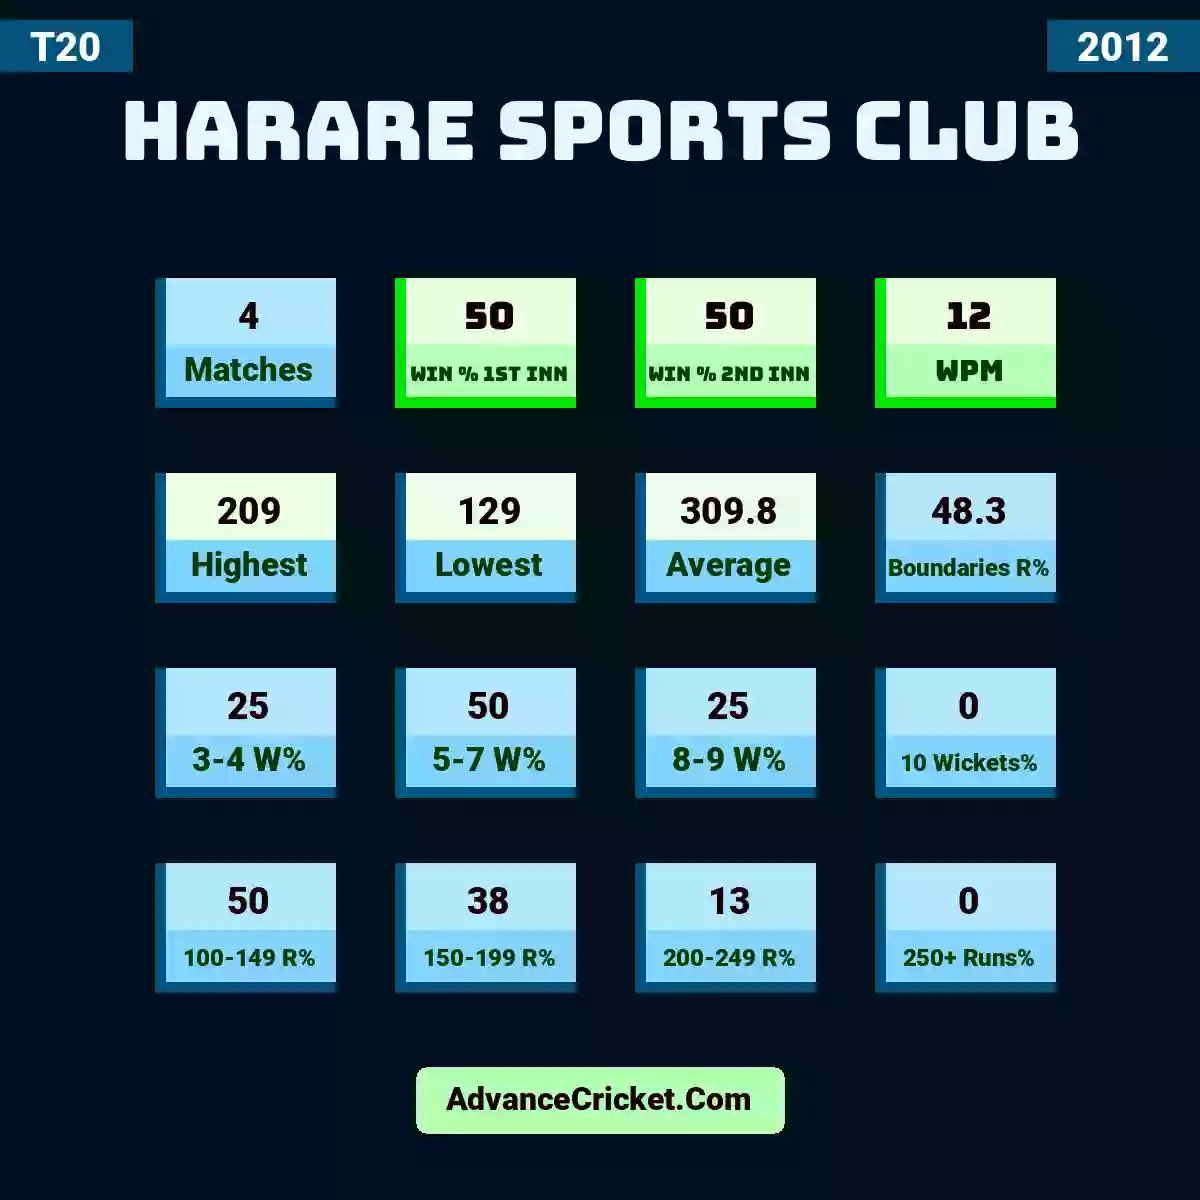 Image showing Harare Sports Club with Matches: 4, Win % 1st Inn: 50, Win % 2nd Inn: 50, WPM: 12, Highest: 209, Lowest: 129, Average: 309.8, Boundaries R%: 48.3, 3-4 W%: 25, 5-7 W%: 50, 8-9 W%: 25, 10 Wickets%: 0, 100-149 R%: 50, 150-199 R%: 38, 200-249 R%: 13, 250+ Runs%: 0.